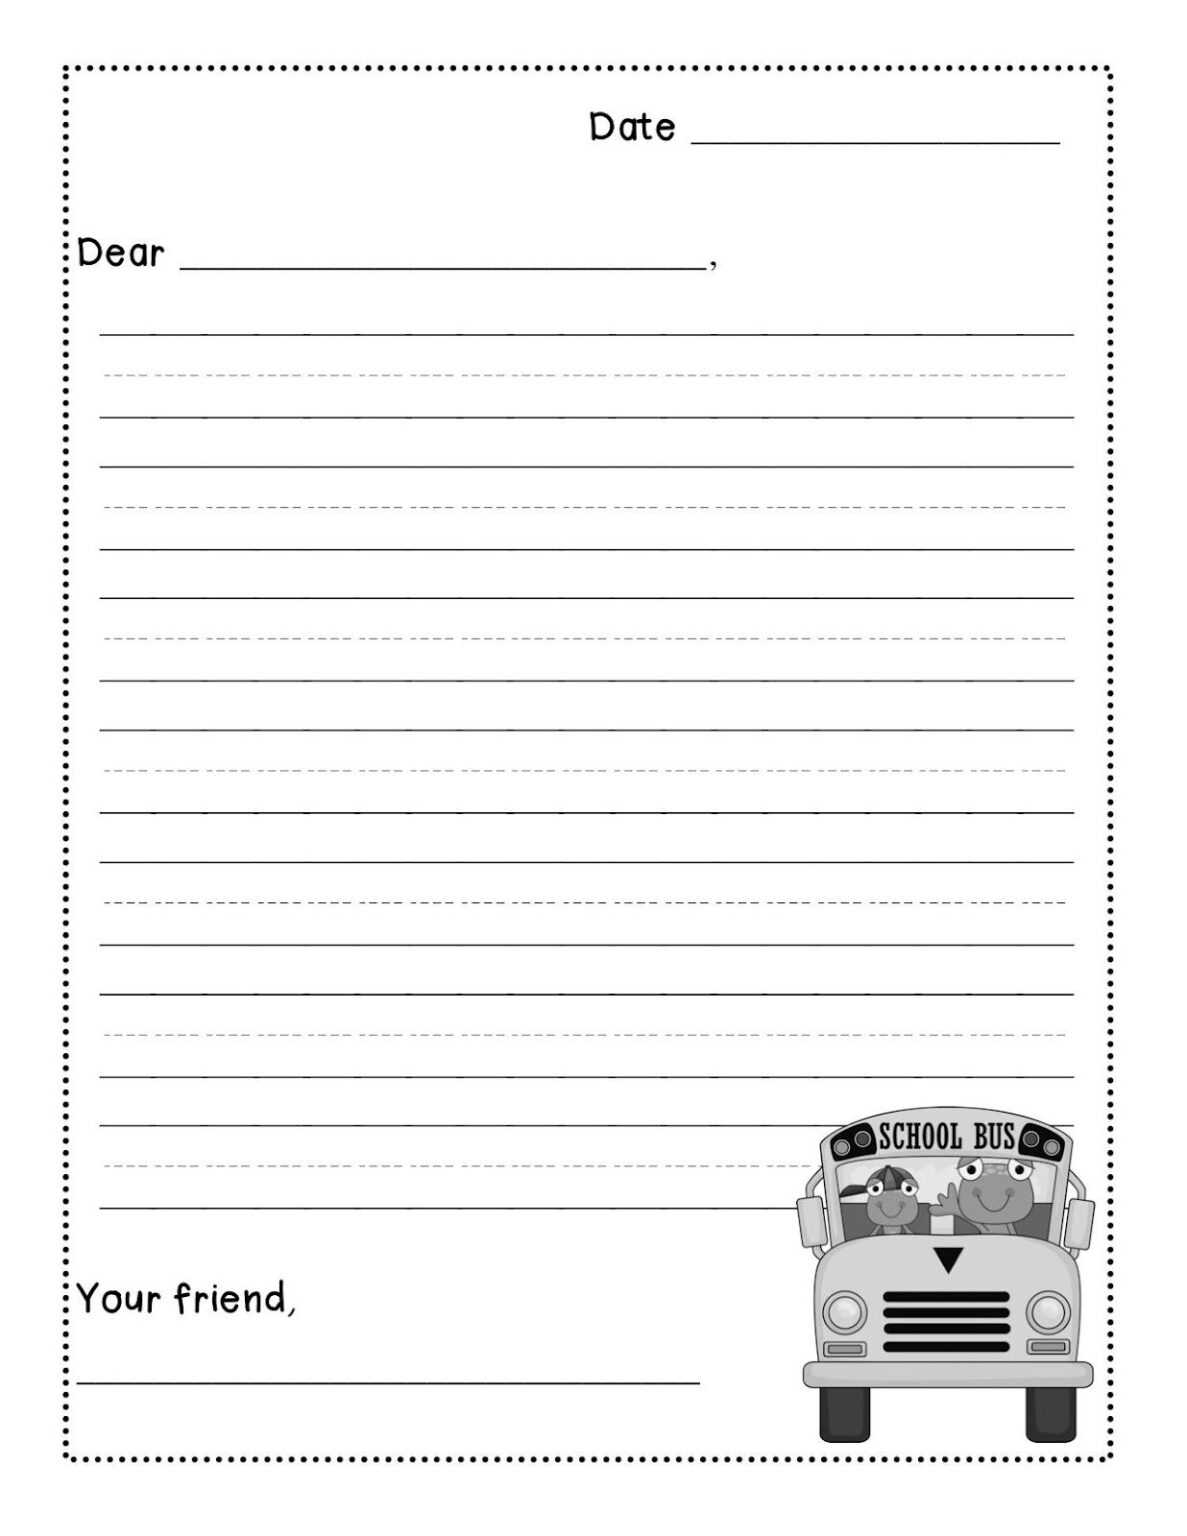 Friendly Letter Writing Freebie Levelized Templates Up For Regarding Blank Letter Writing 